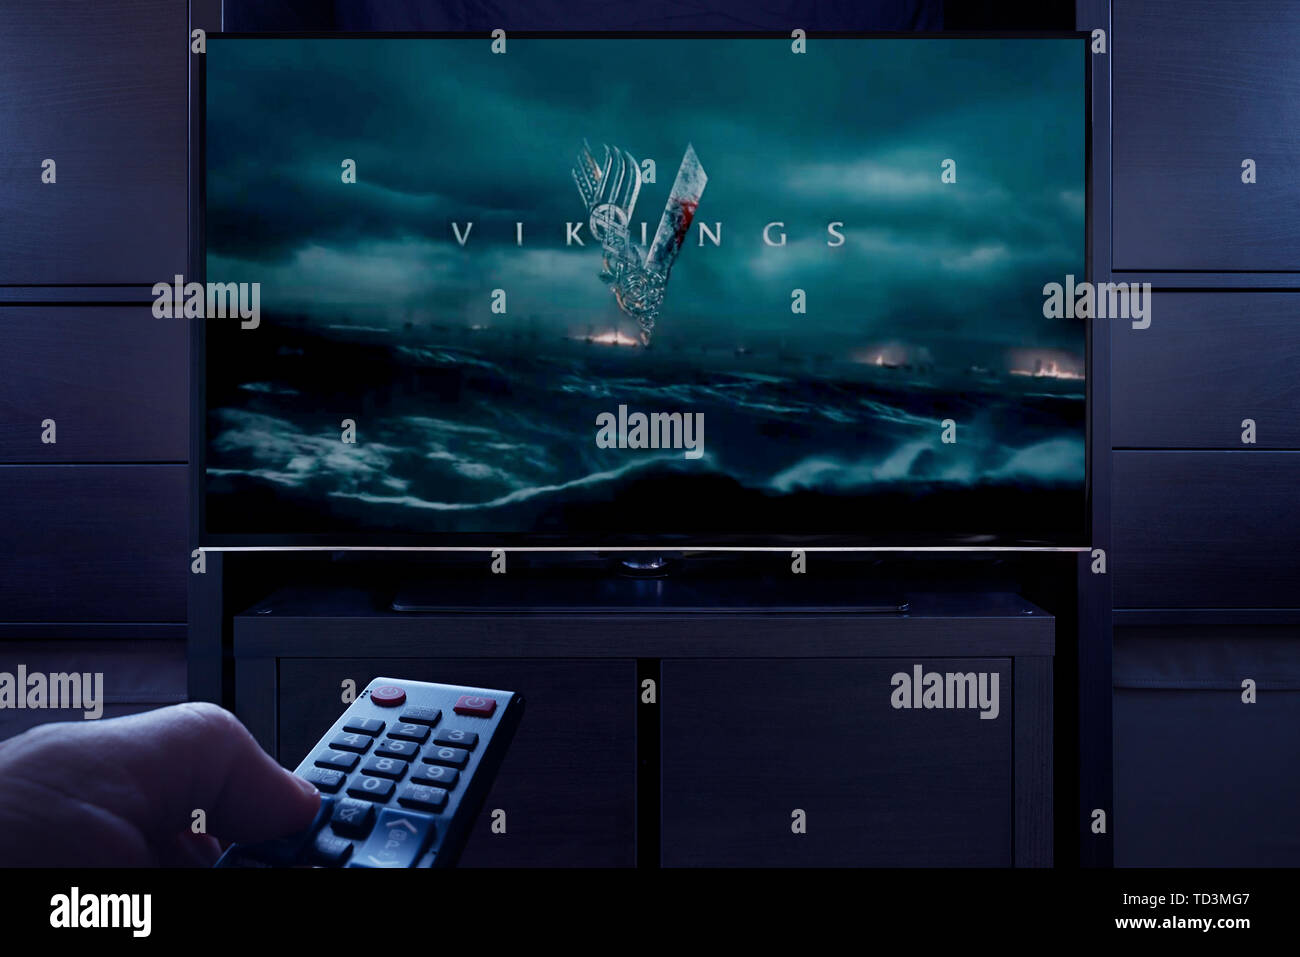 A man points a TV remote at the television which displays the Vikings main title screen (Editorial use only). Stock Photo